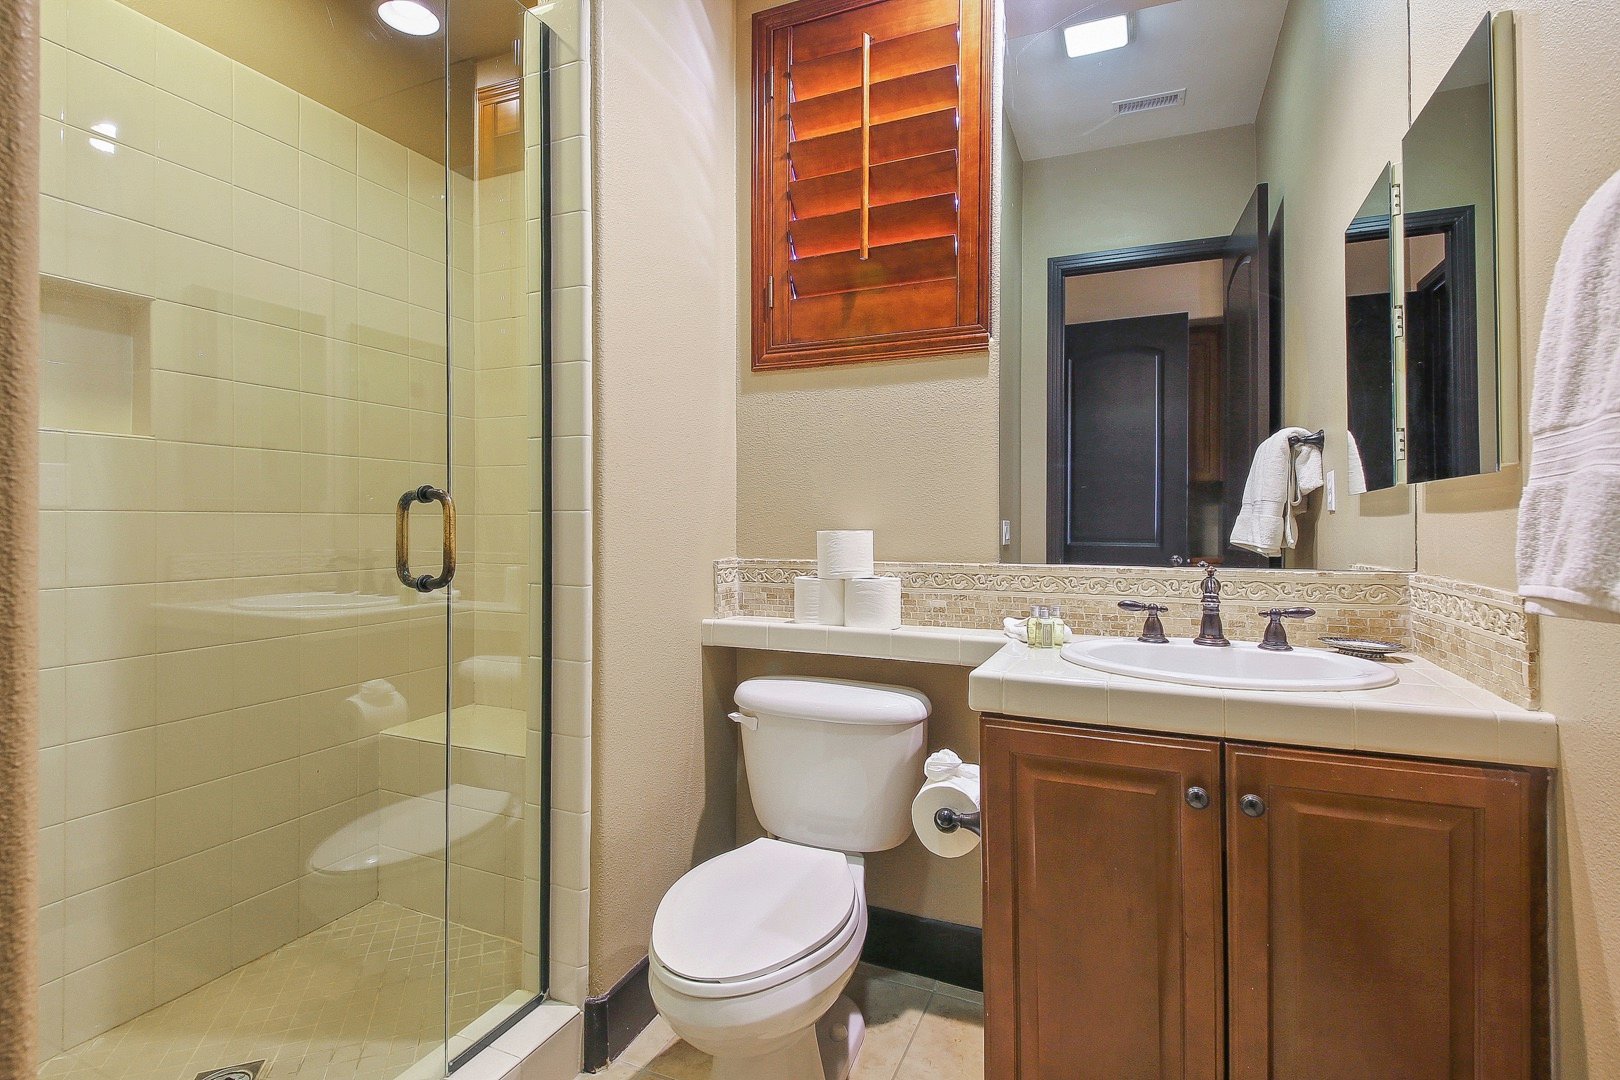 ​​​​​​​Bathroom 4 is located in front of bedroom 5 and features a tile shower and vanity sink. It may be used to service bedrooms 5 and 6.